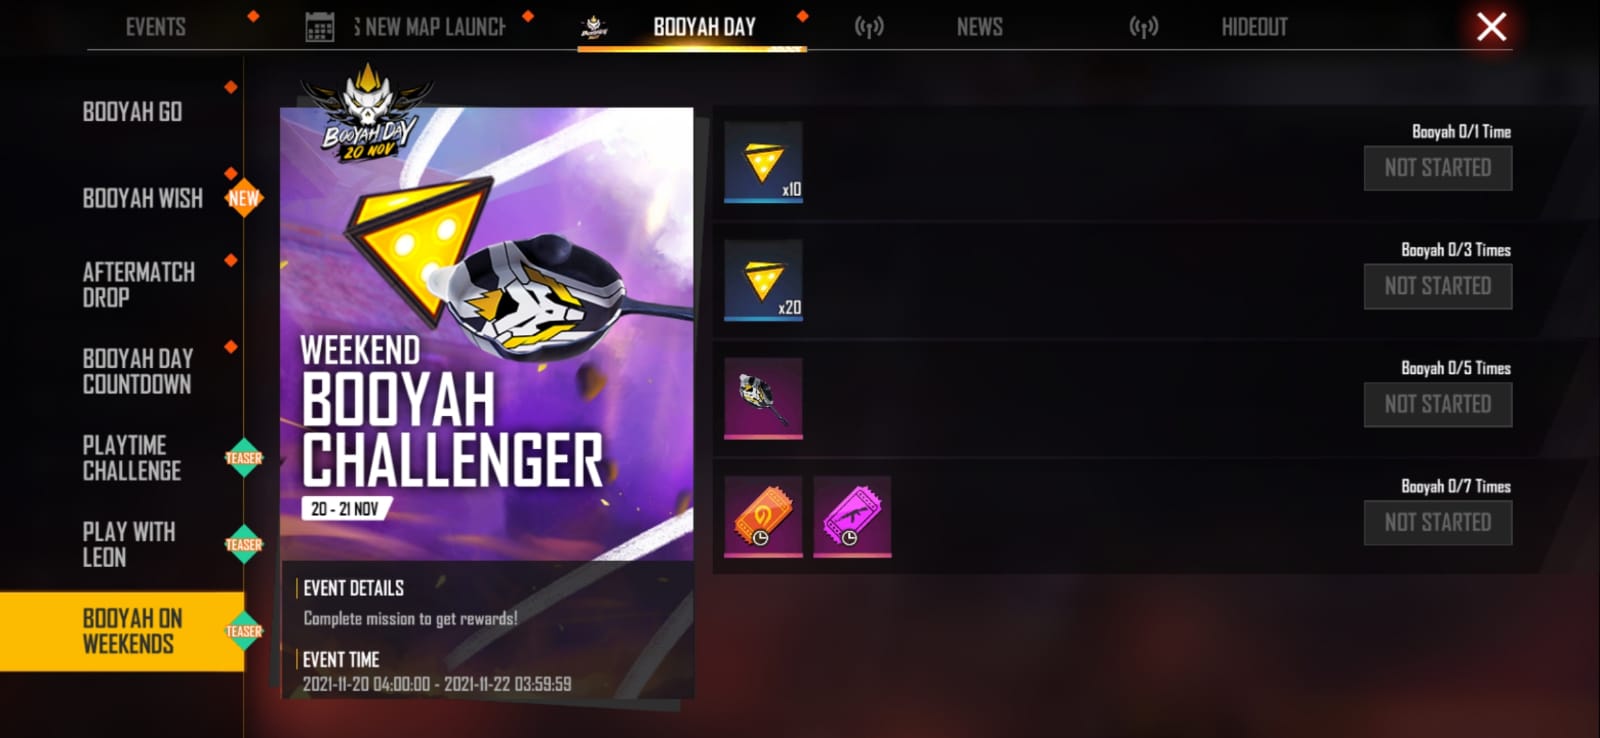 Garena Free Fire Weekend Booyah Challenger Event: Complete Mission to Get Exciting Rewards including Pan skins